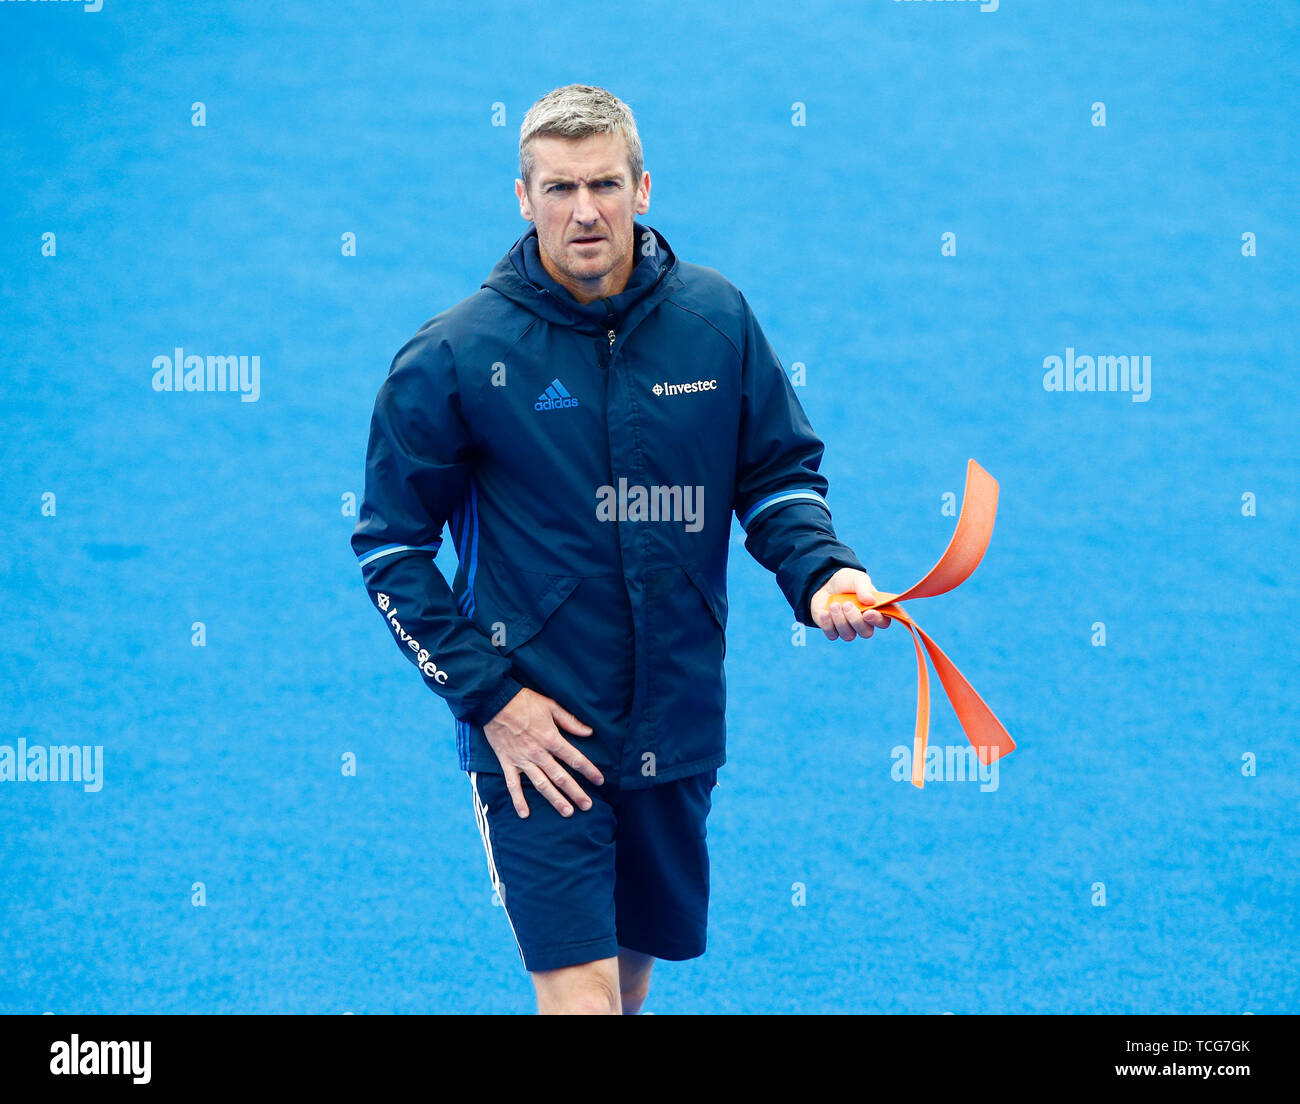 London, UK. 07th June, 2019. LONDON, England. June 07: David Ralph of Great Britain during FIH Pro League between Great Britain and Germany at Lee Valley Hockey and Tennis Centre on 07 June 2019 in London, England. Credit: Action Foto Sport/Alamy Live News Stock Photo